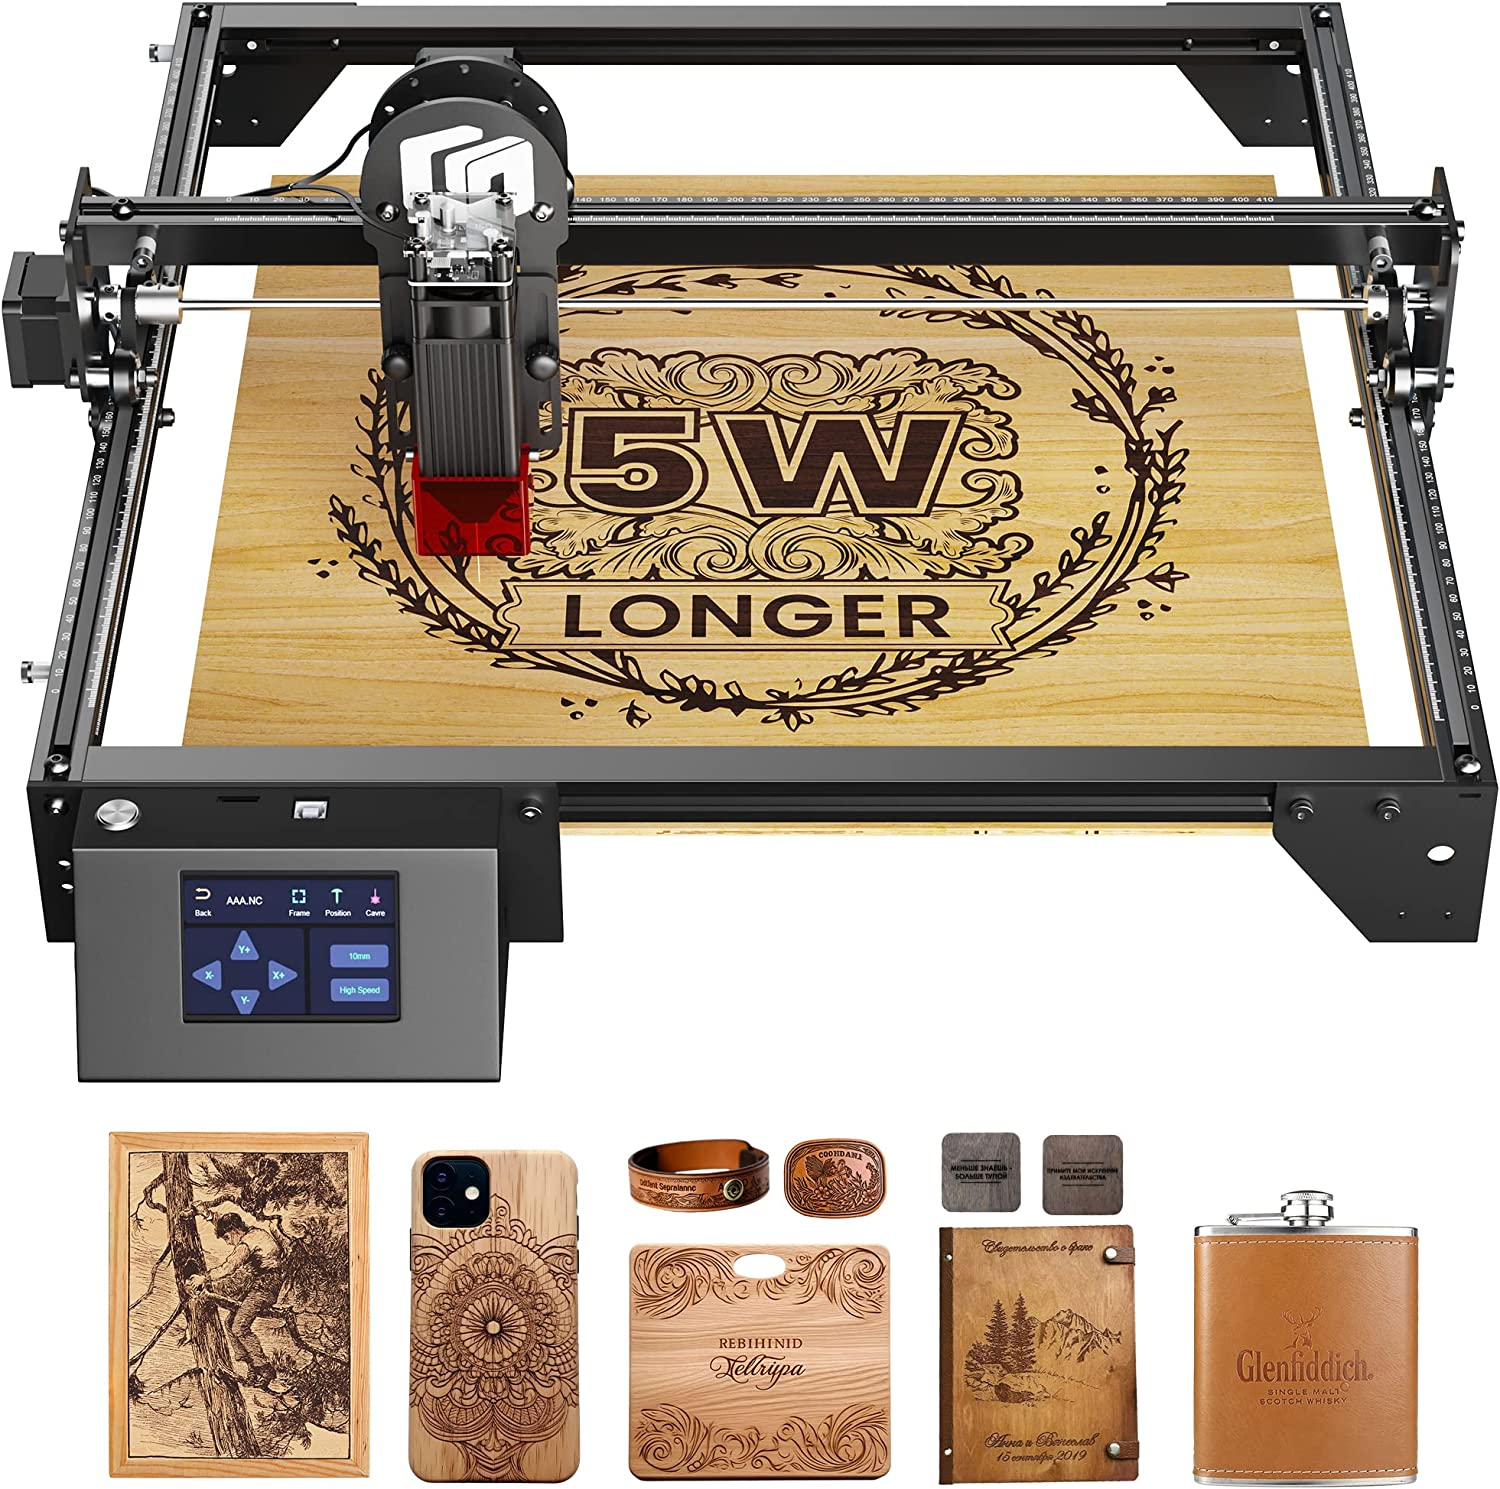 Longer RAY5 5W Laser Engraver Built-in Touch Screen 400x400mm